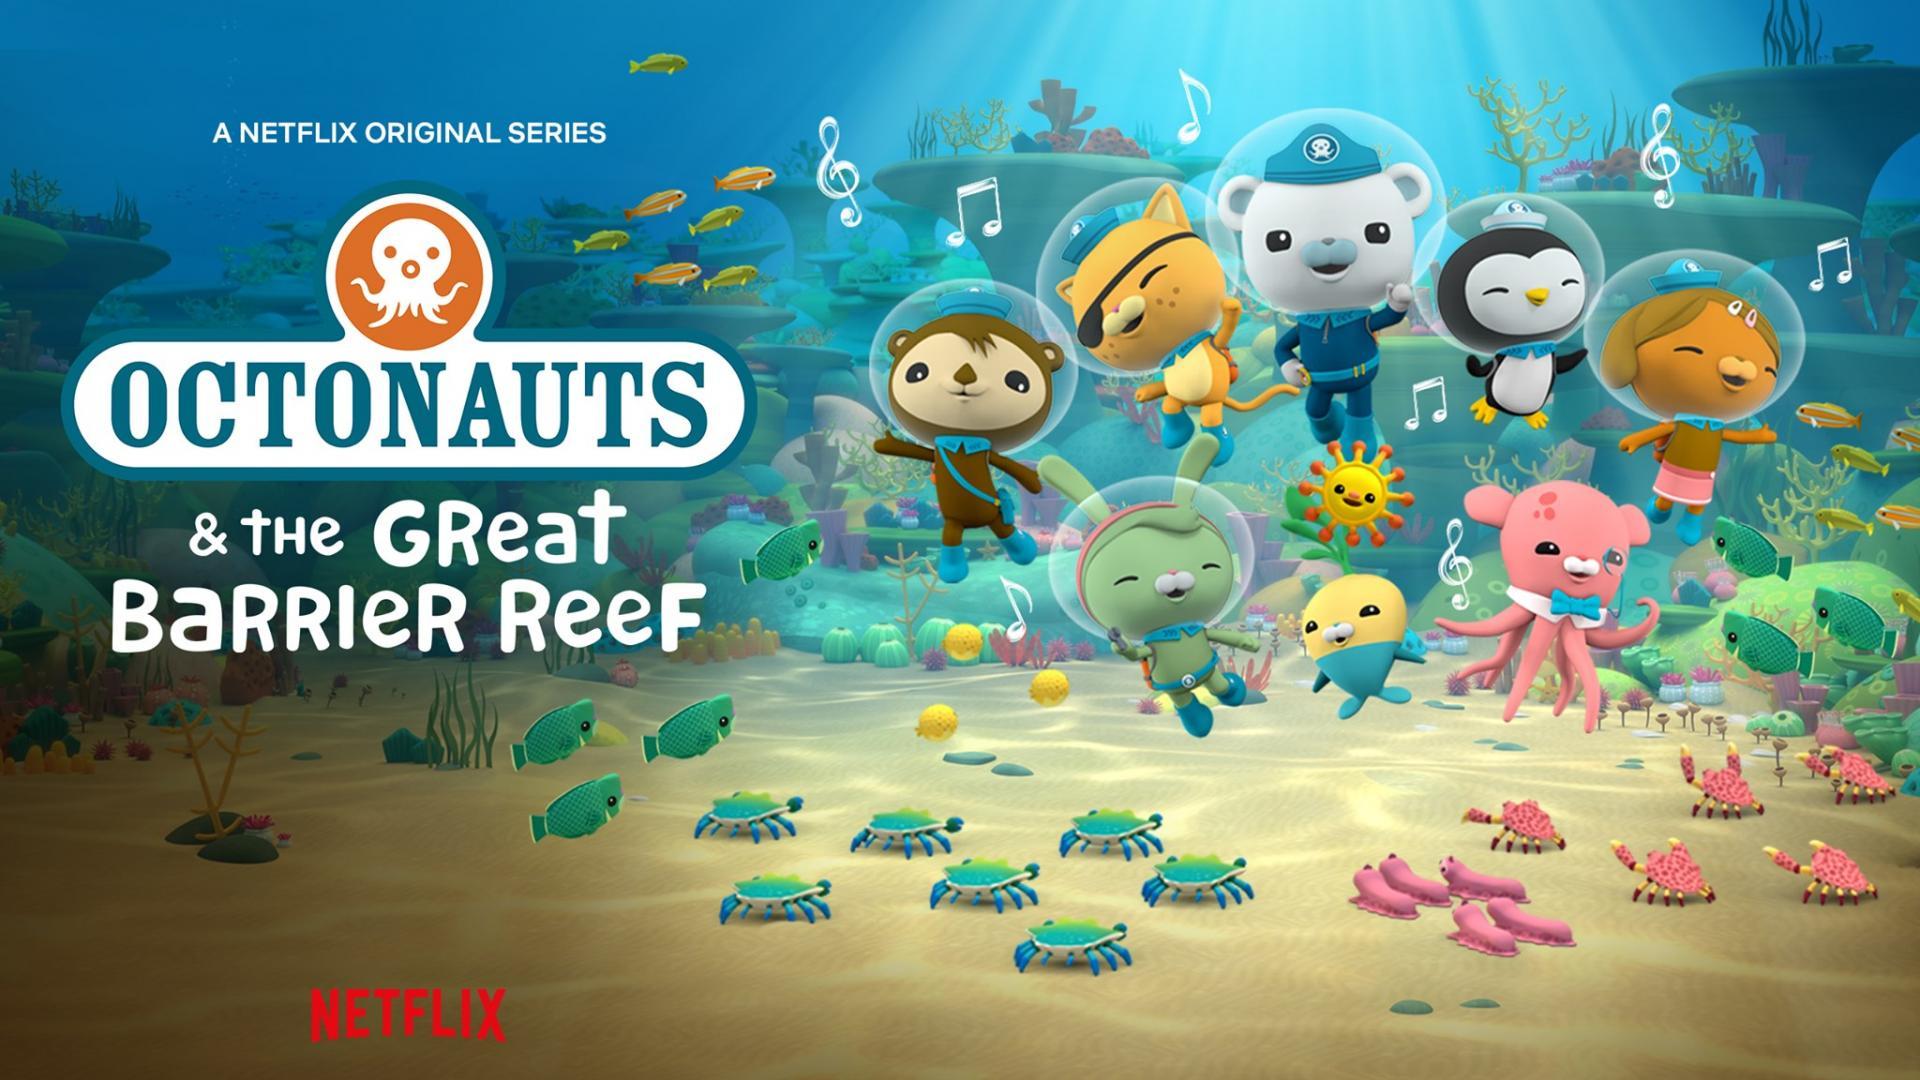 Octonauts & the Great Barrier Reef (TV) - Posters